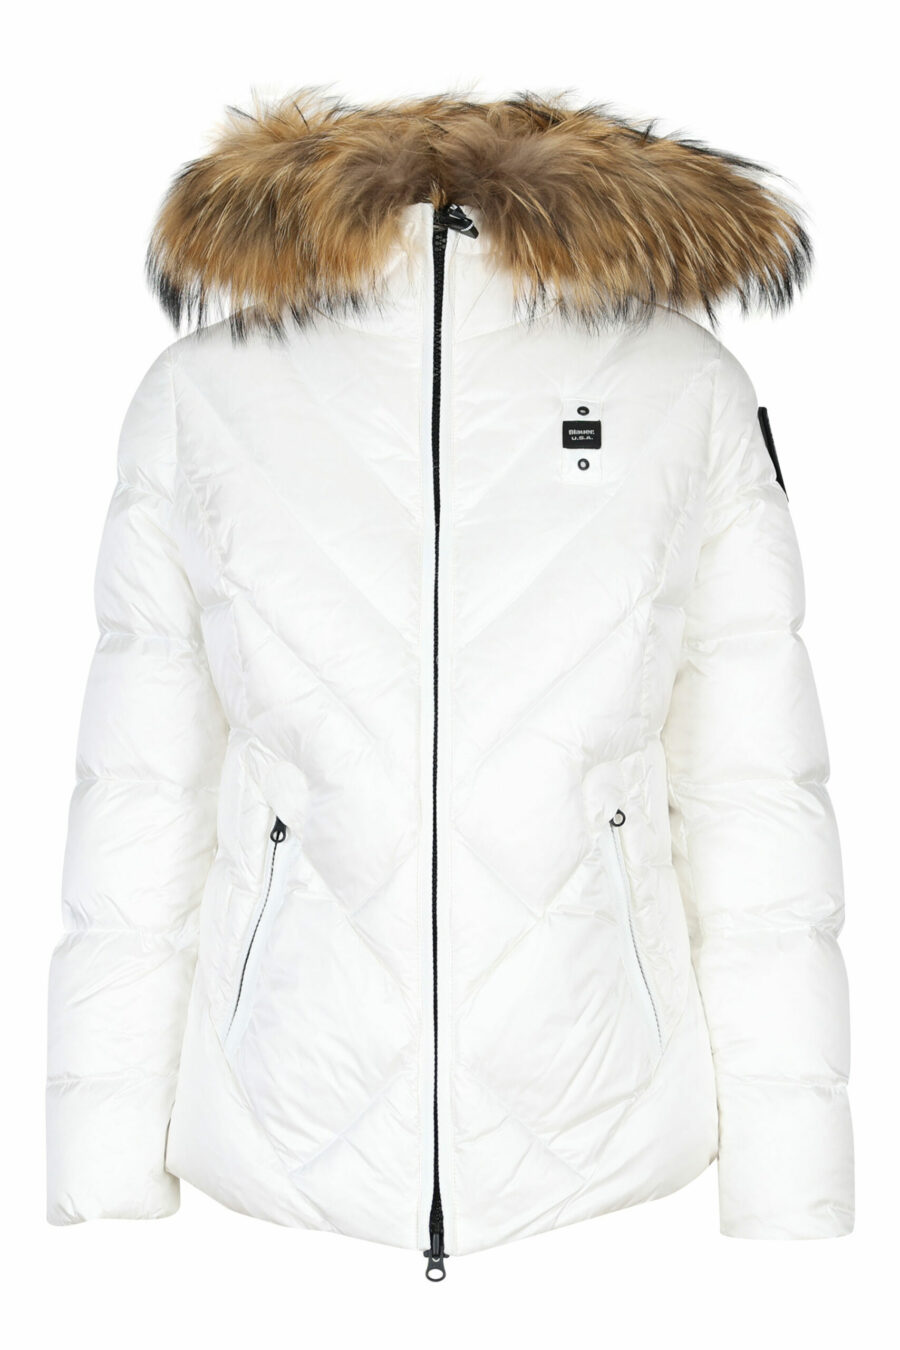 White hooded jacket with fur hood and diagonal lines and beige lining - 8058610678791 1 scaled